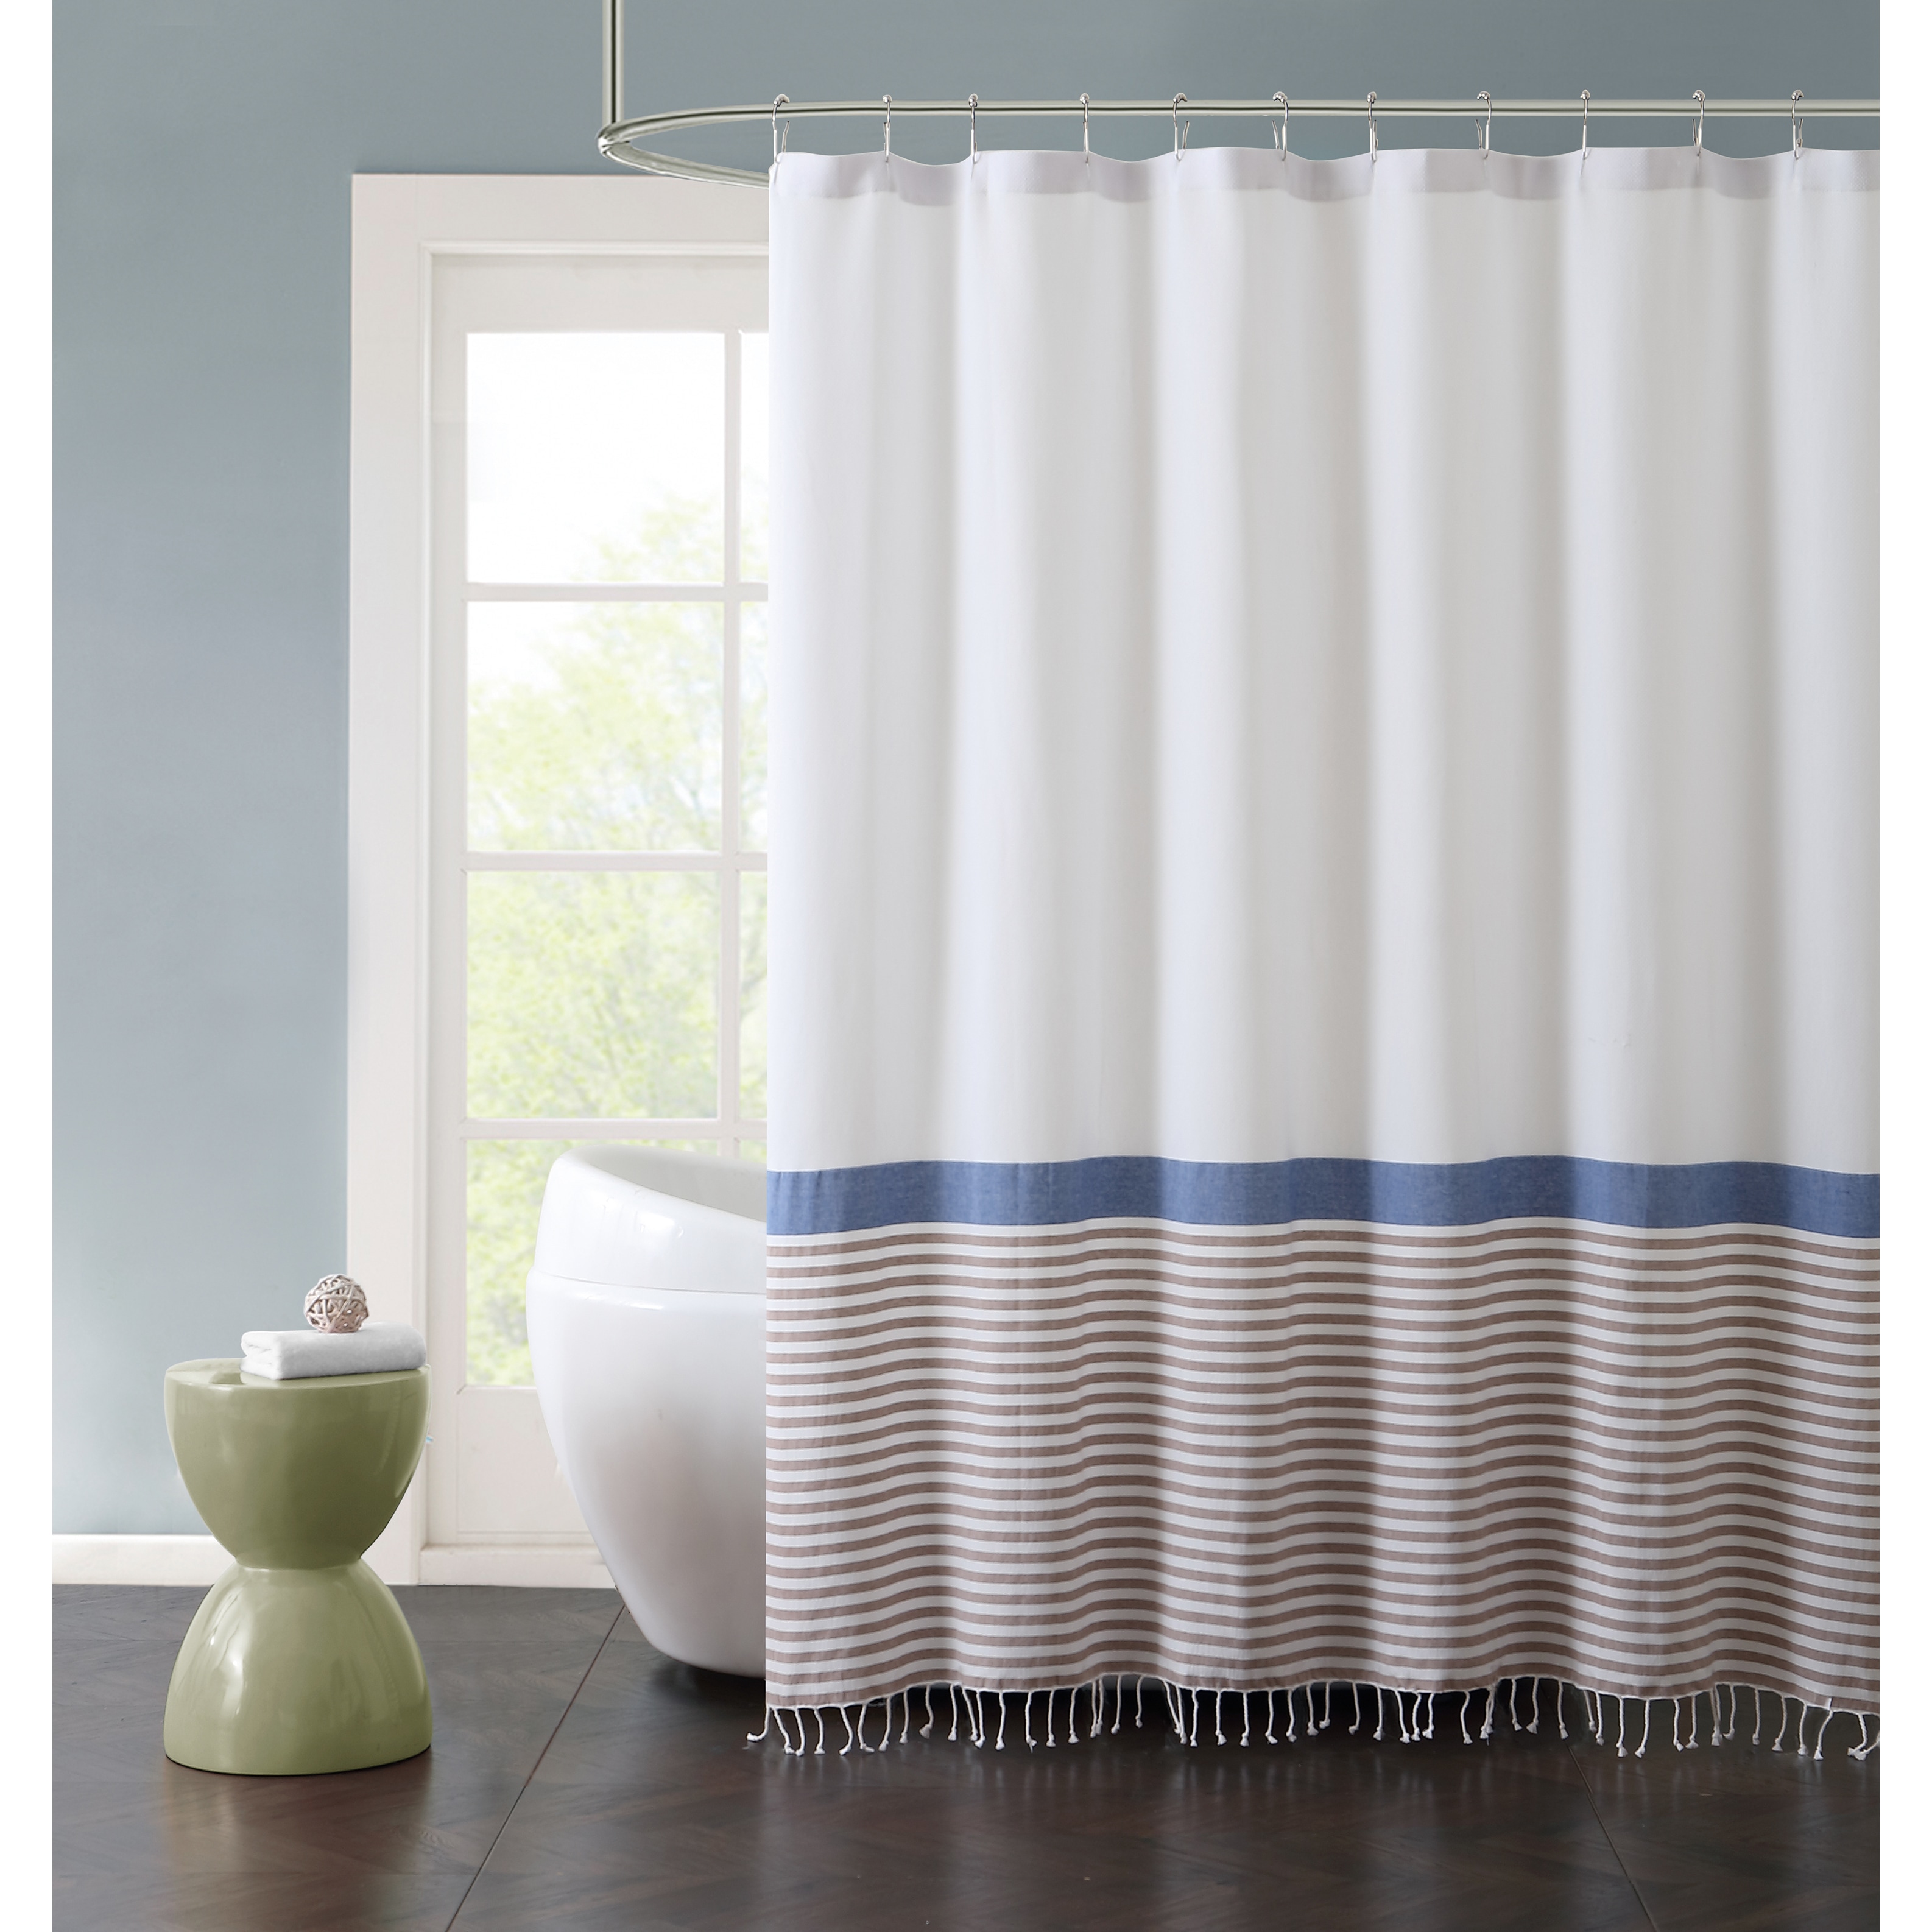 72" French Country Ticking Stripe Pool Blue-Green Fabric Shower Curtain